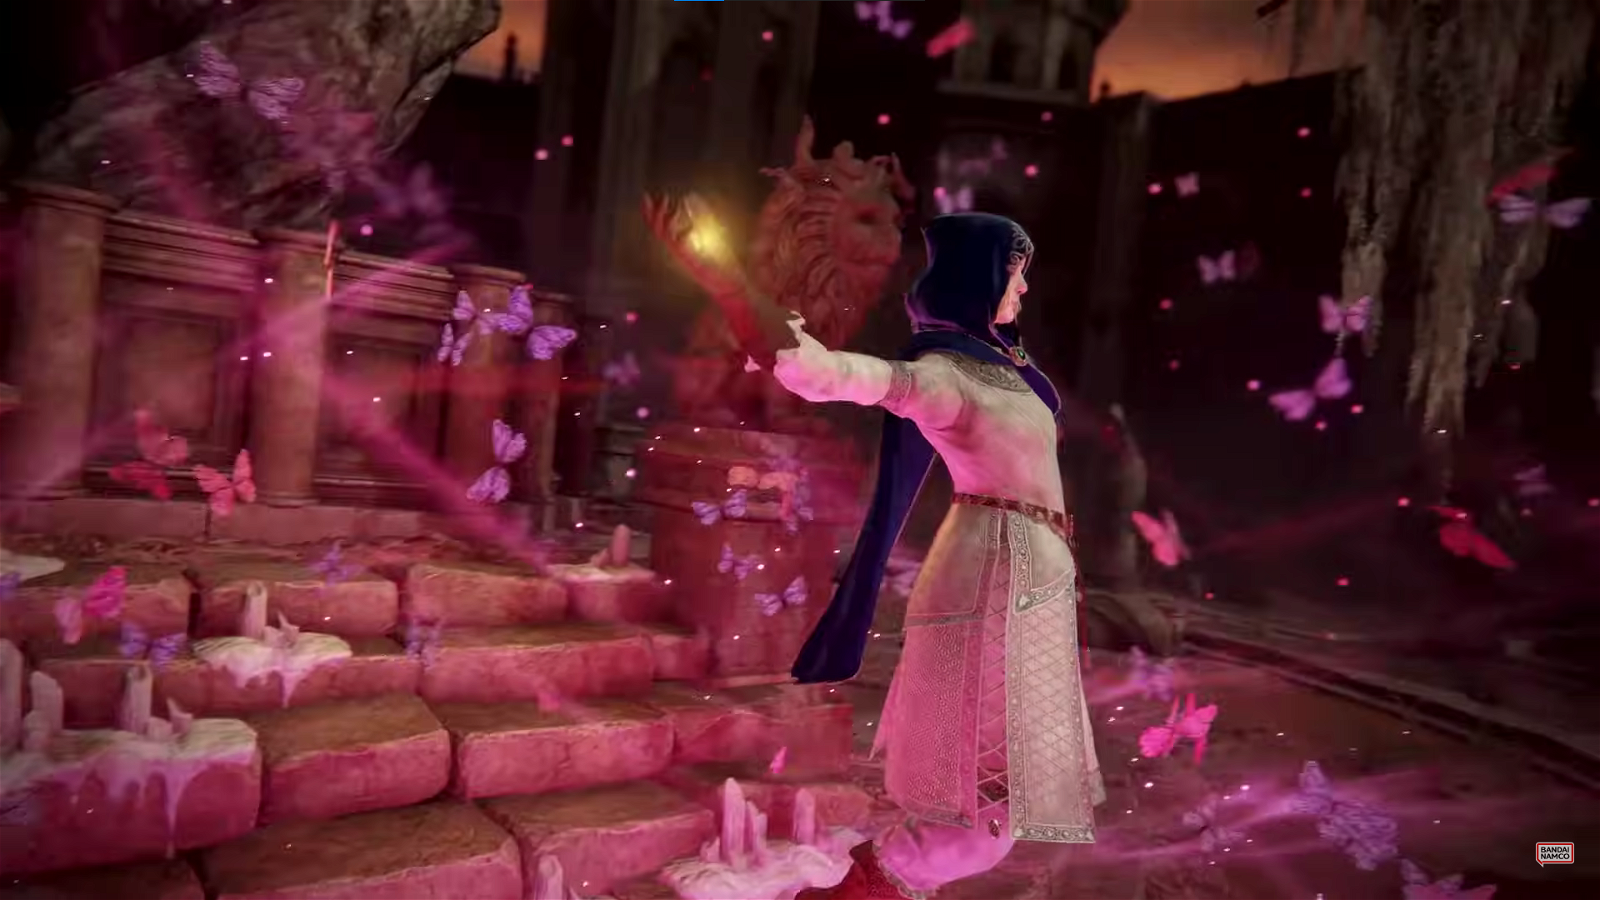 New butterfly spells teased in the trailer